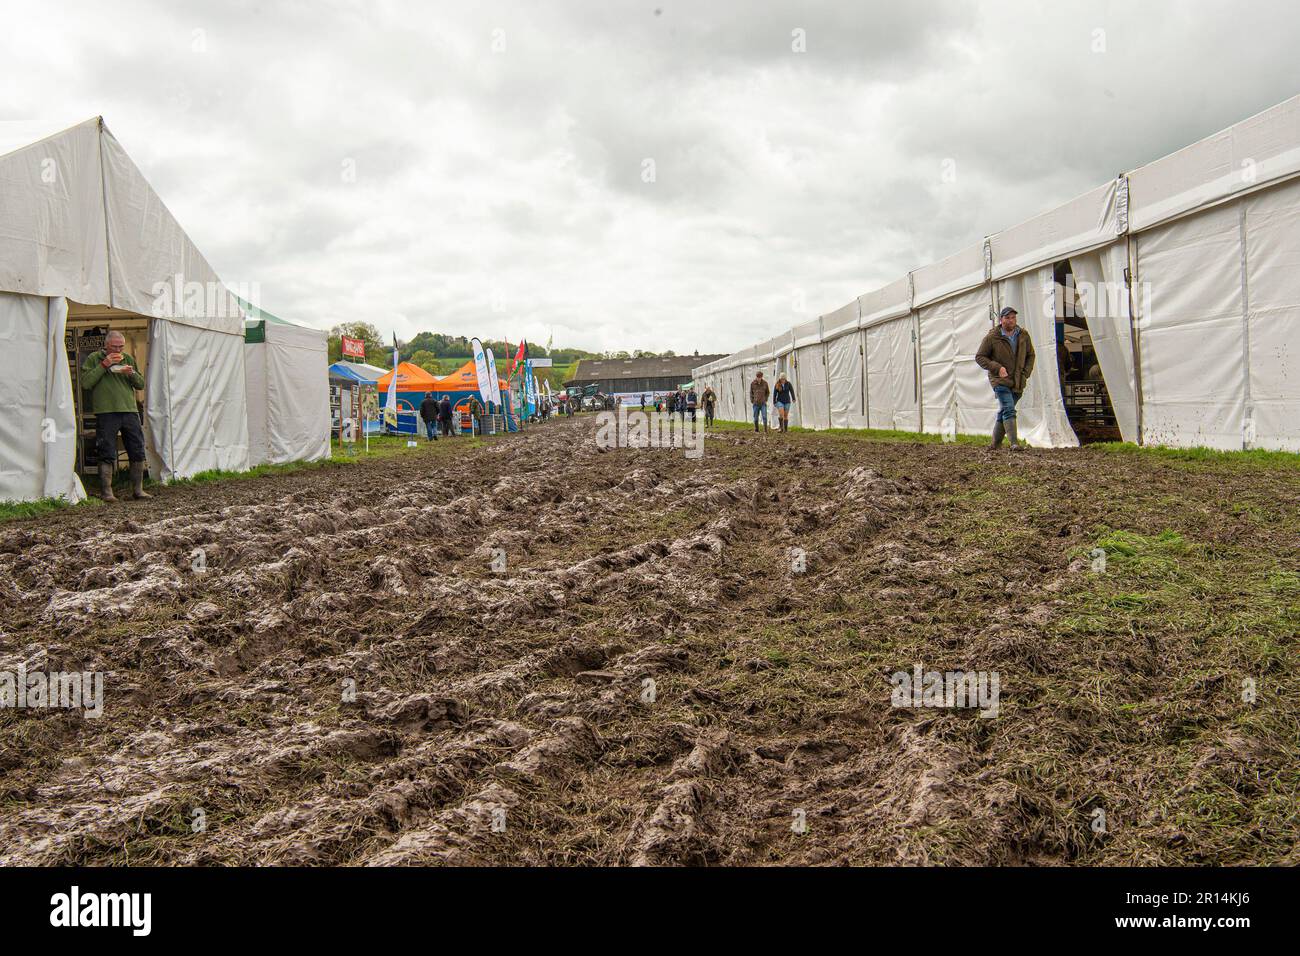 muddy conditions at country show Stock Photo